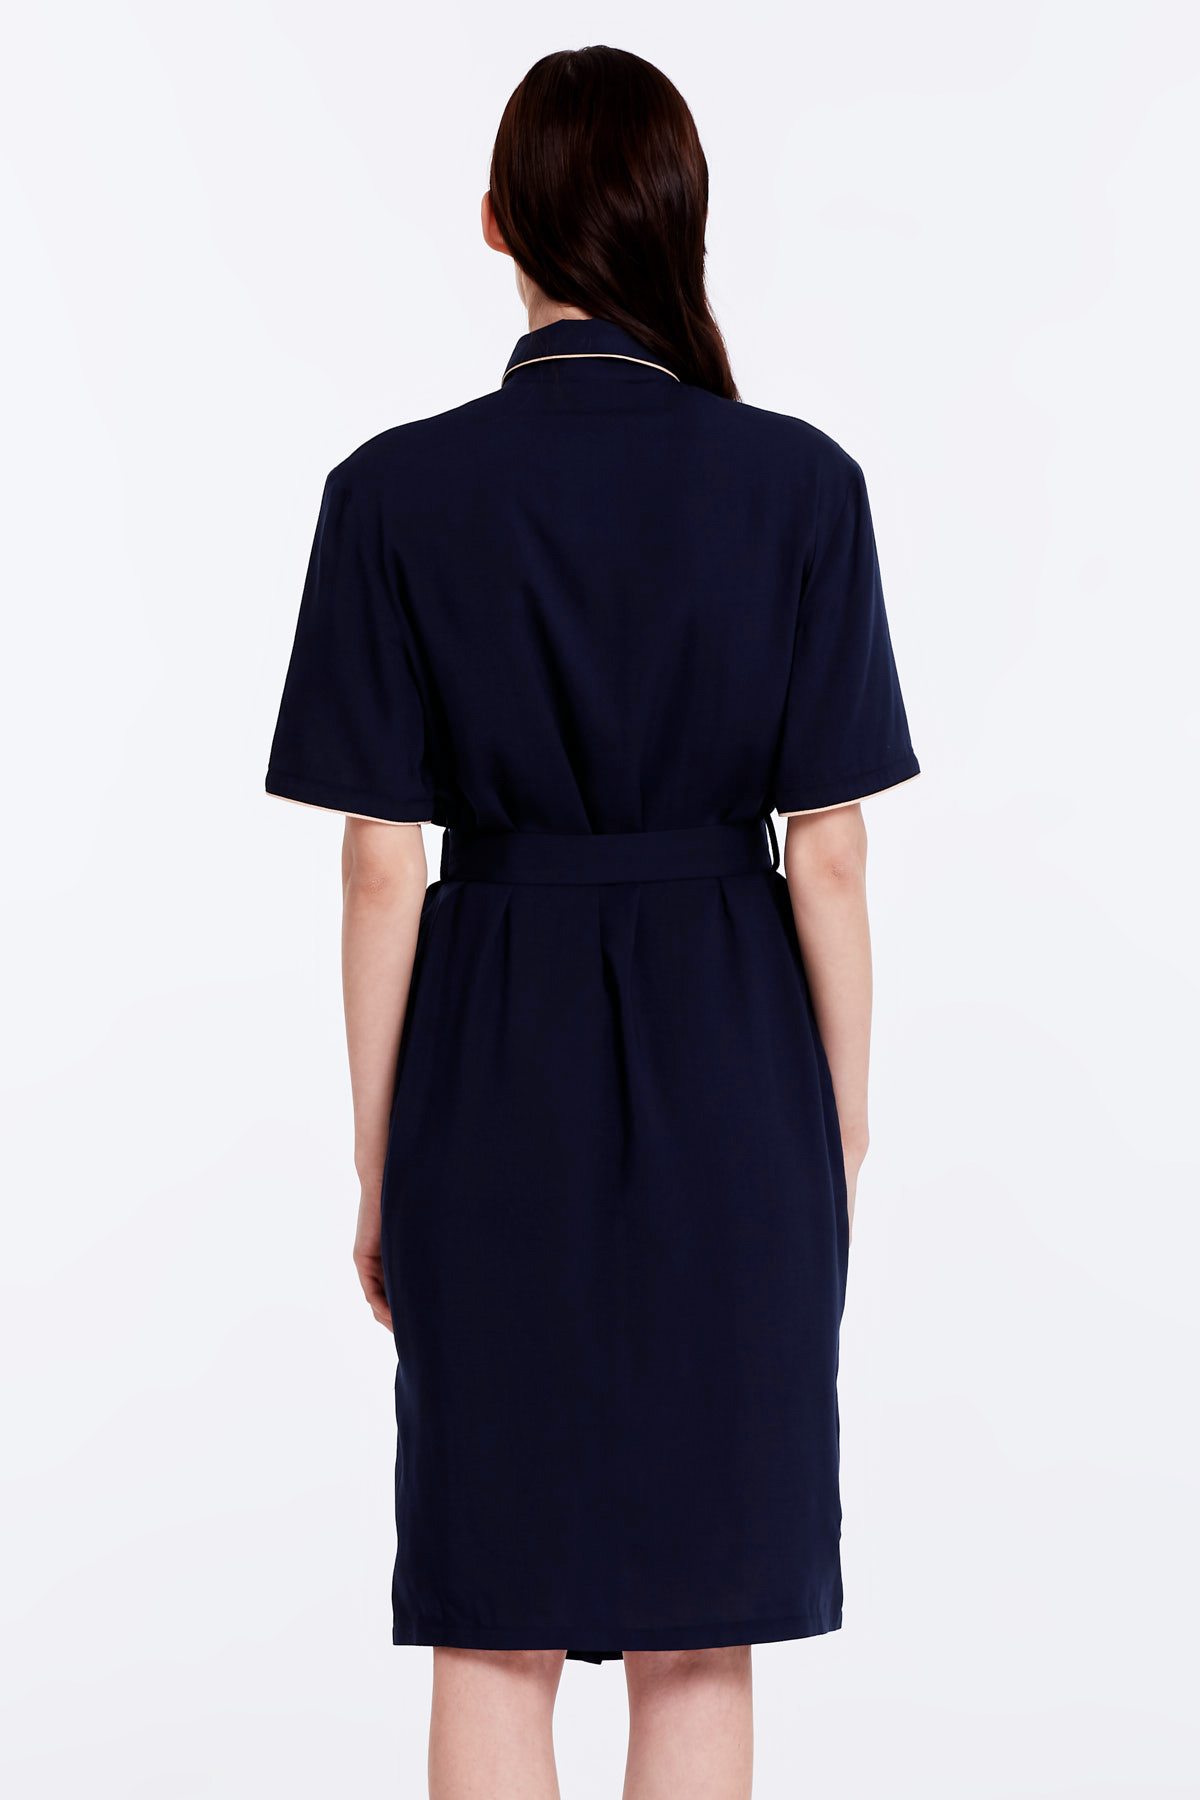 Dark-blue dress with a beige piping, photo 5